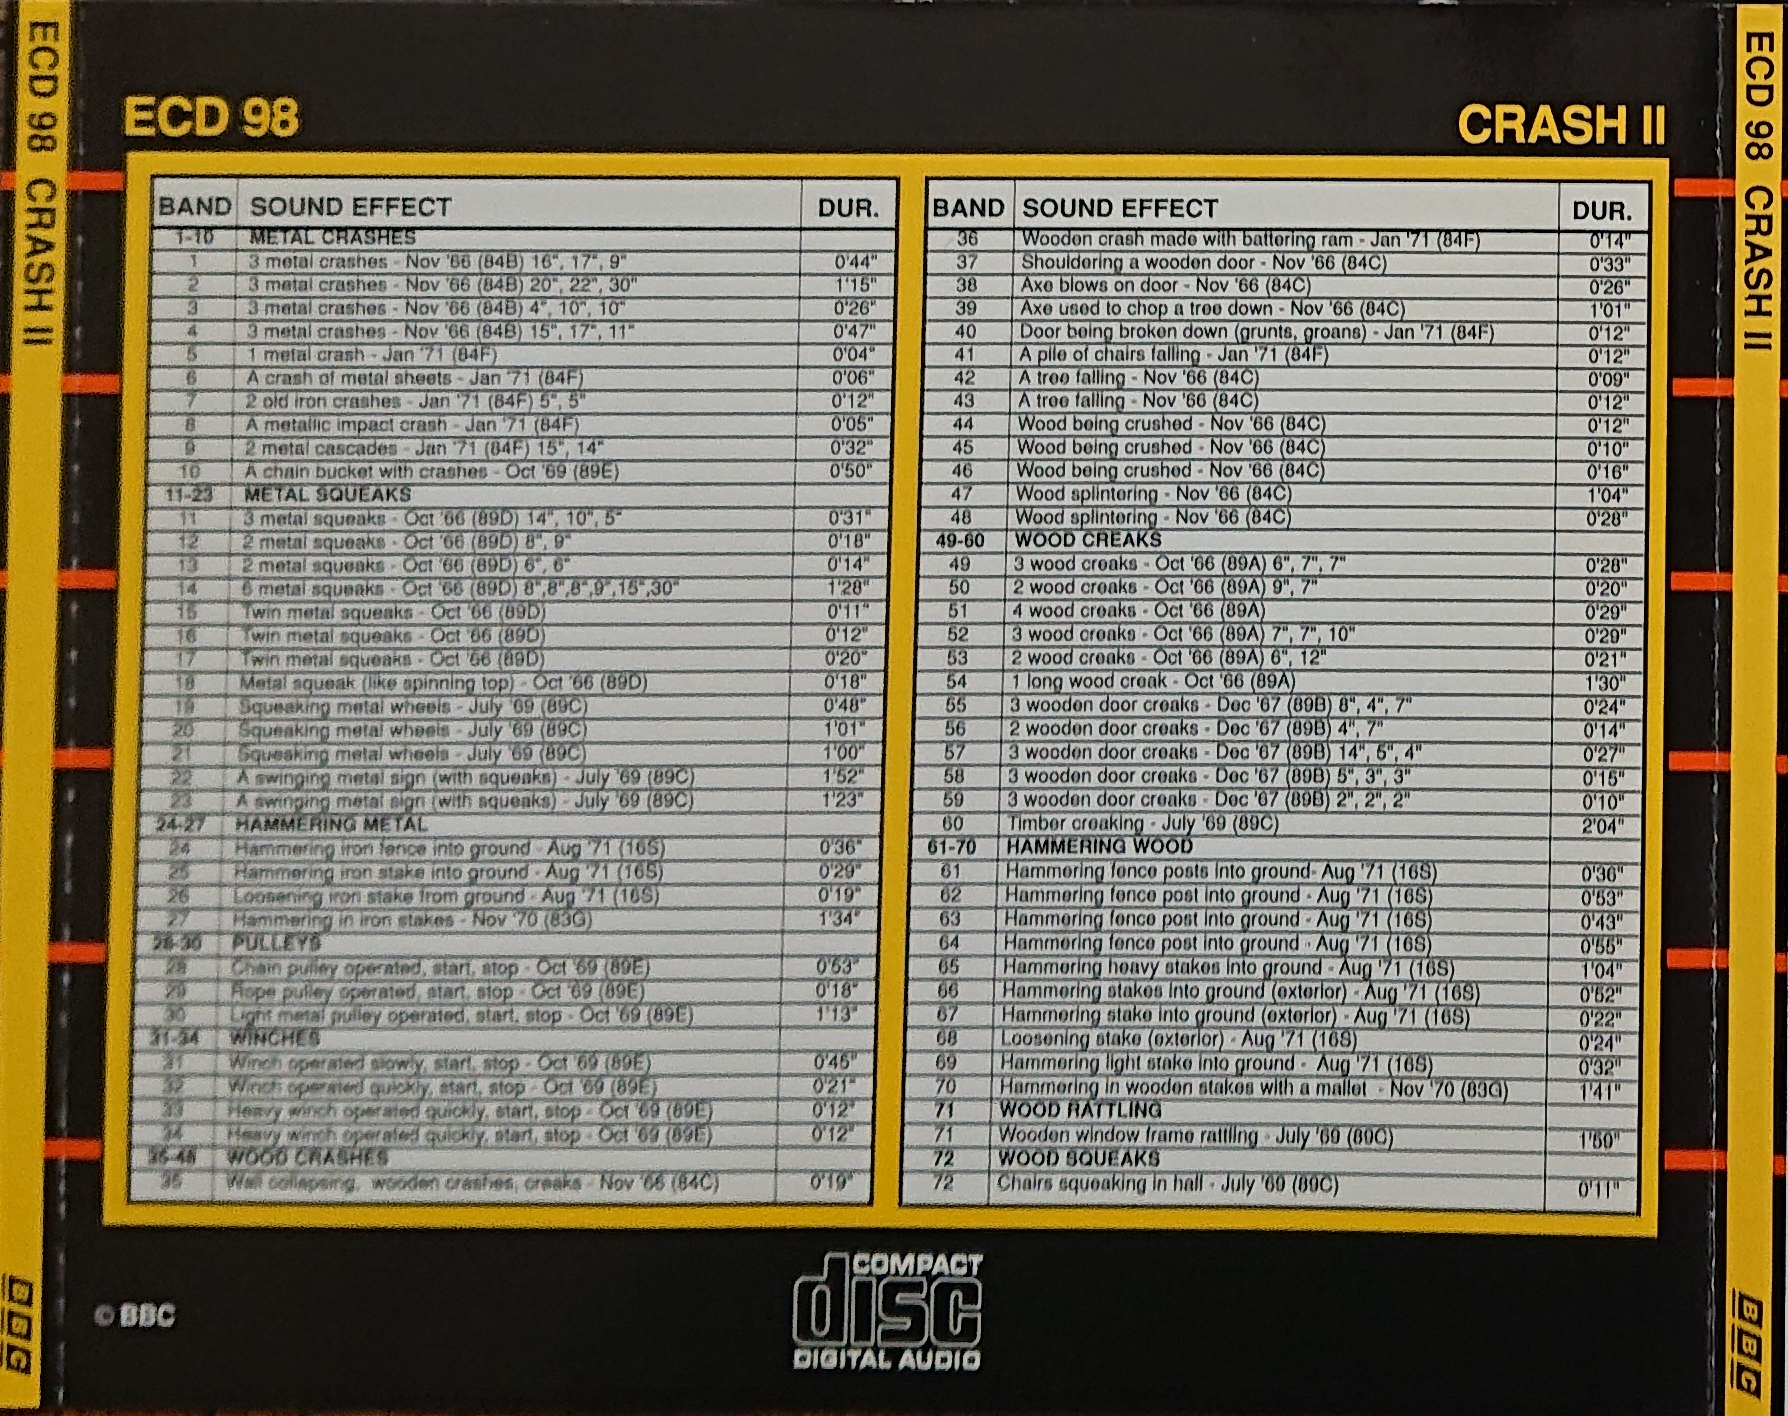 Picture of ECD 98 Crash II by artist Various from the BBC records and Tapes library